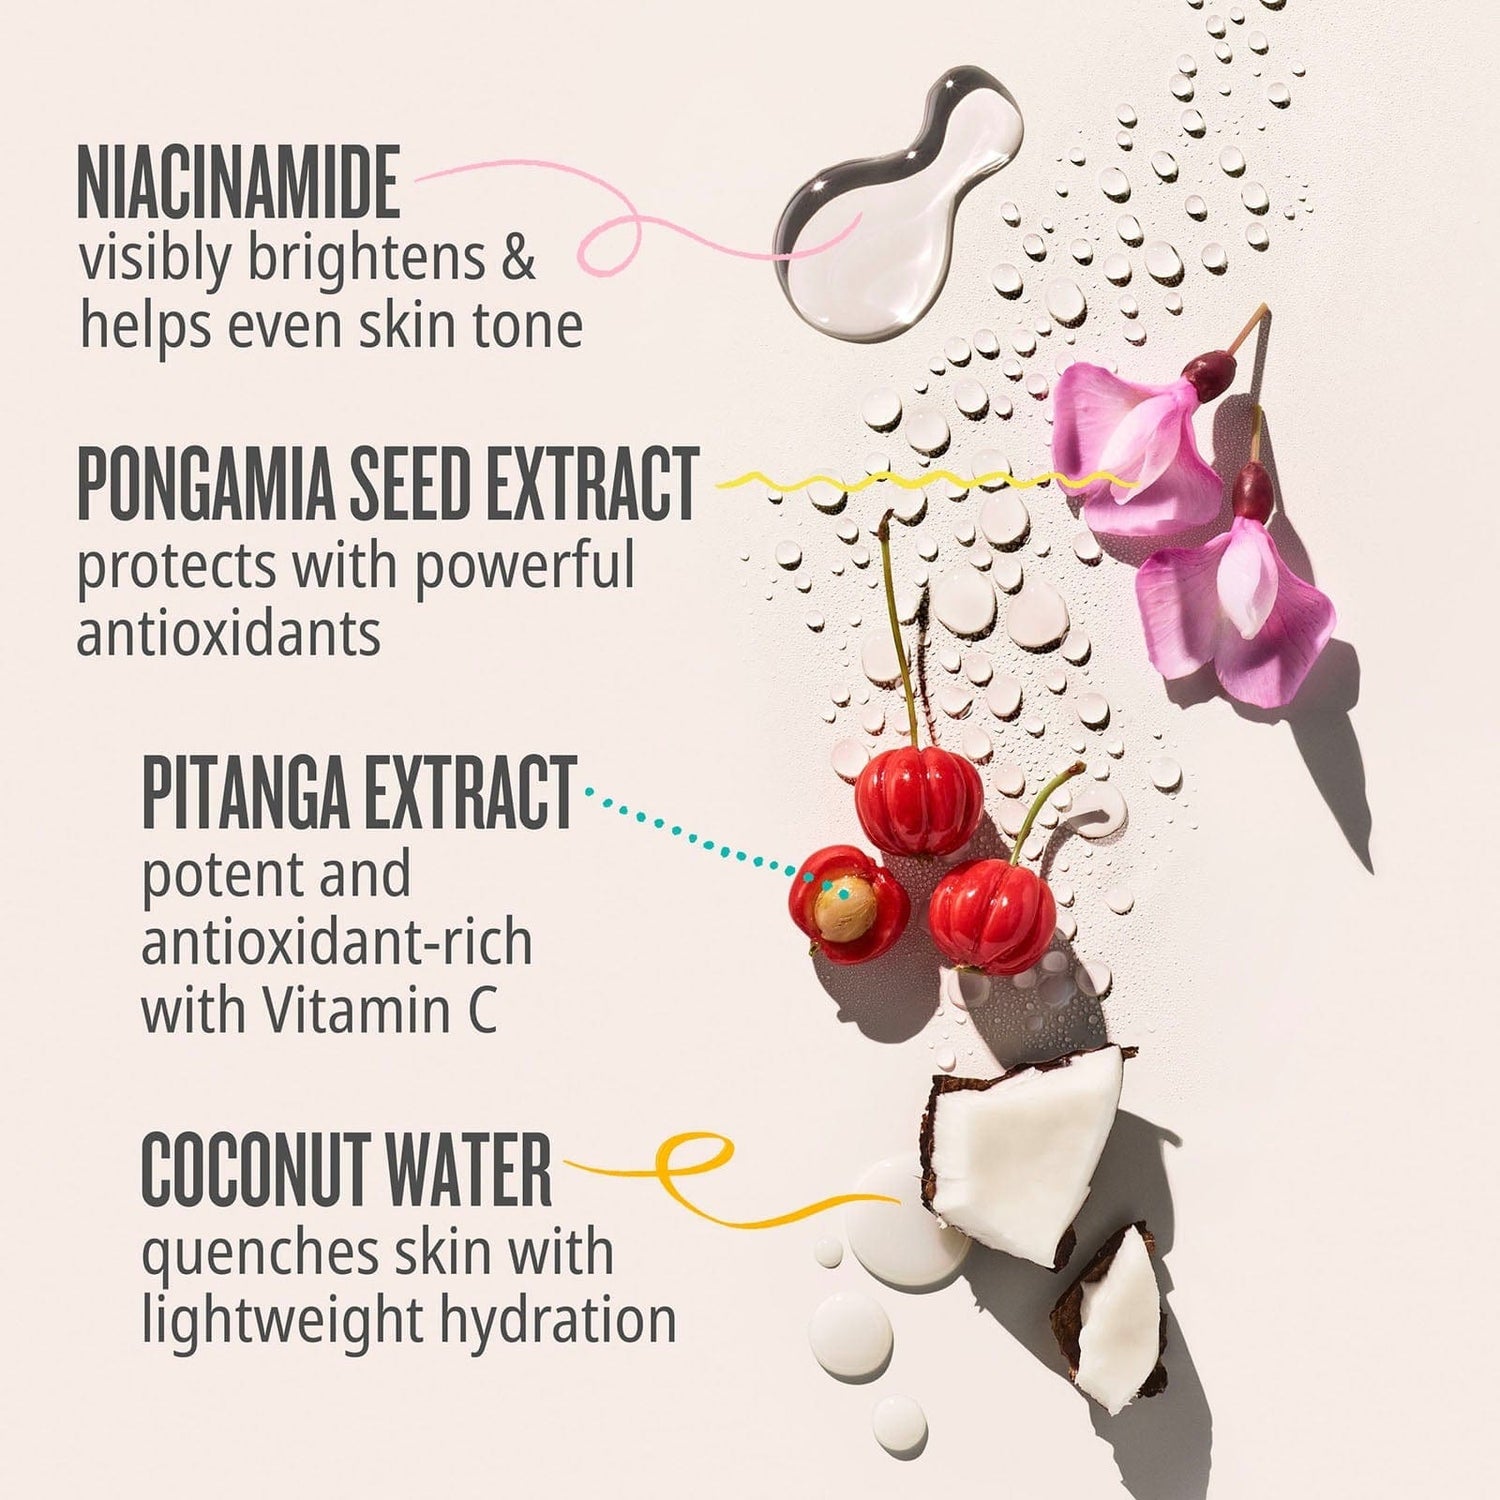 Niacinamide visibly brightens &amp; helps even skin tone. Pongamia seed extract protects with powerful antioxidants. Pitanga extract potent and antioxidant-rich with vitamin c. Coconut water quenches skin with lightweight hydration.